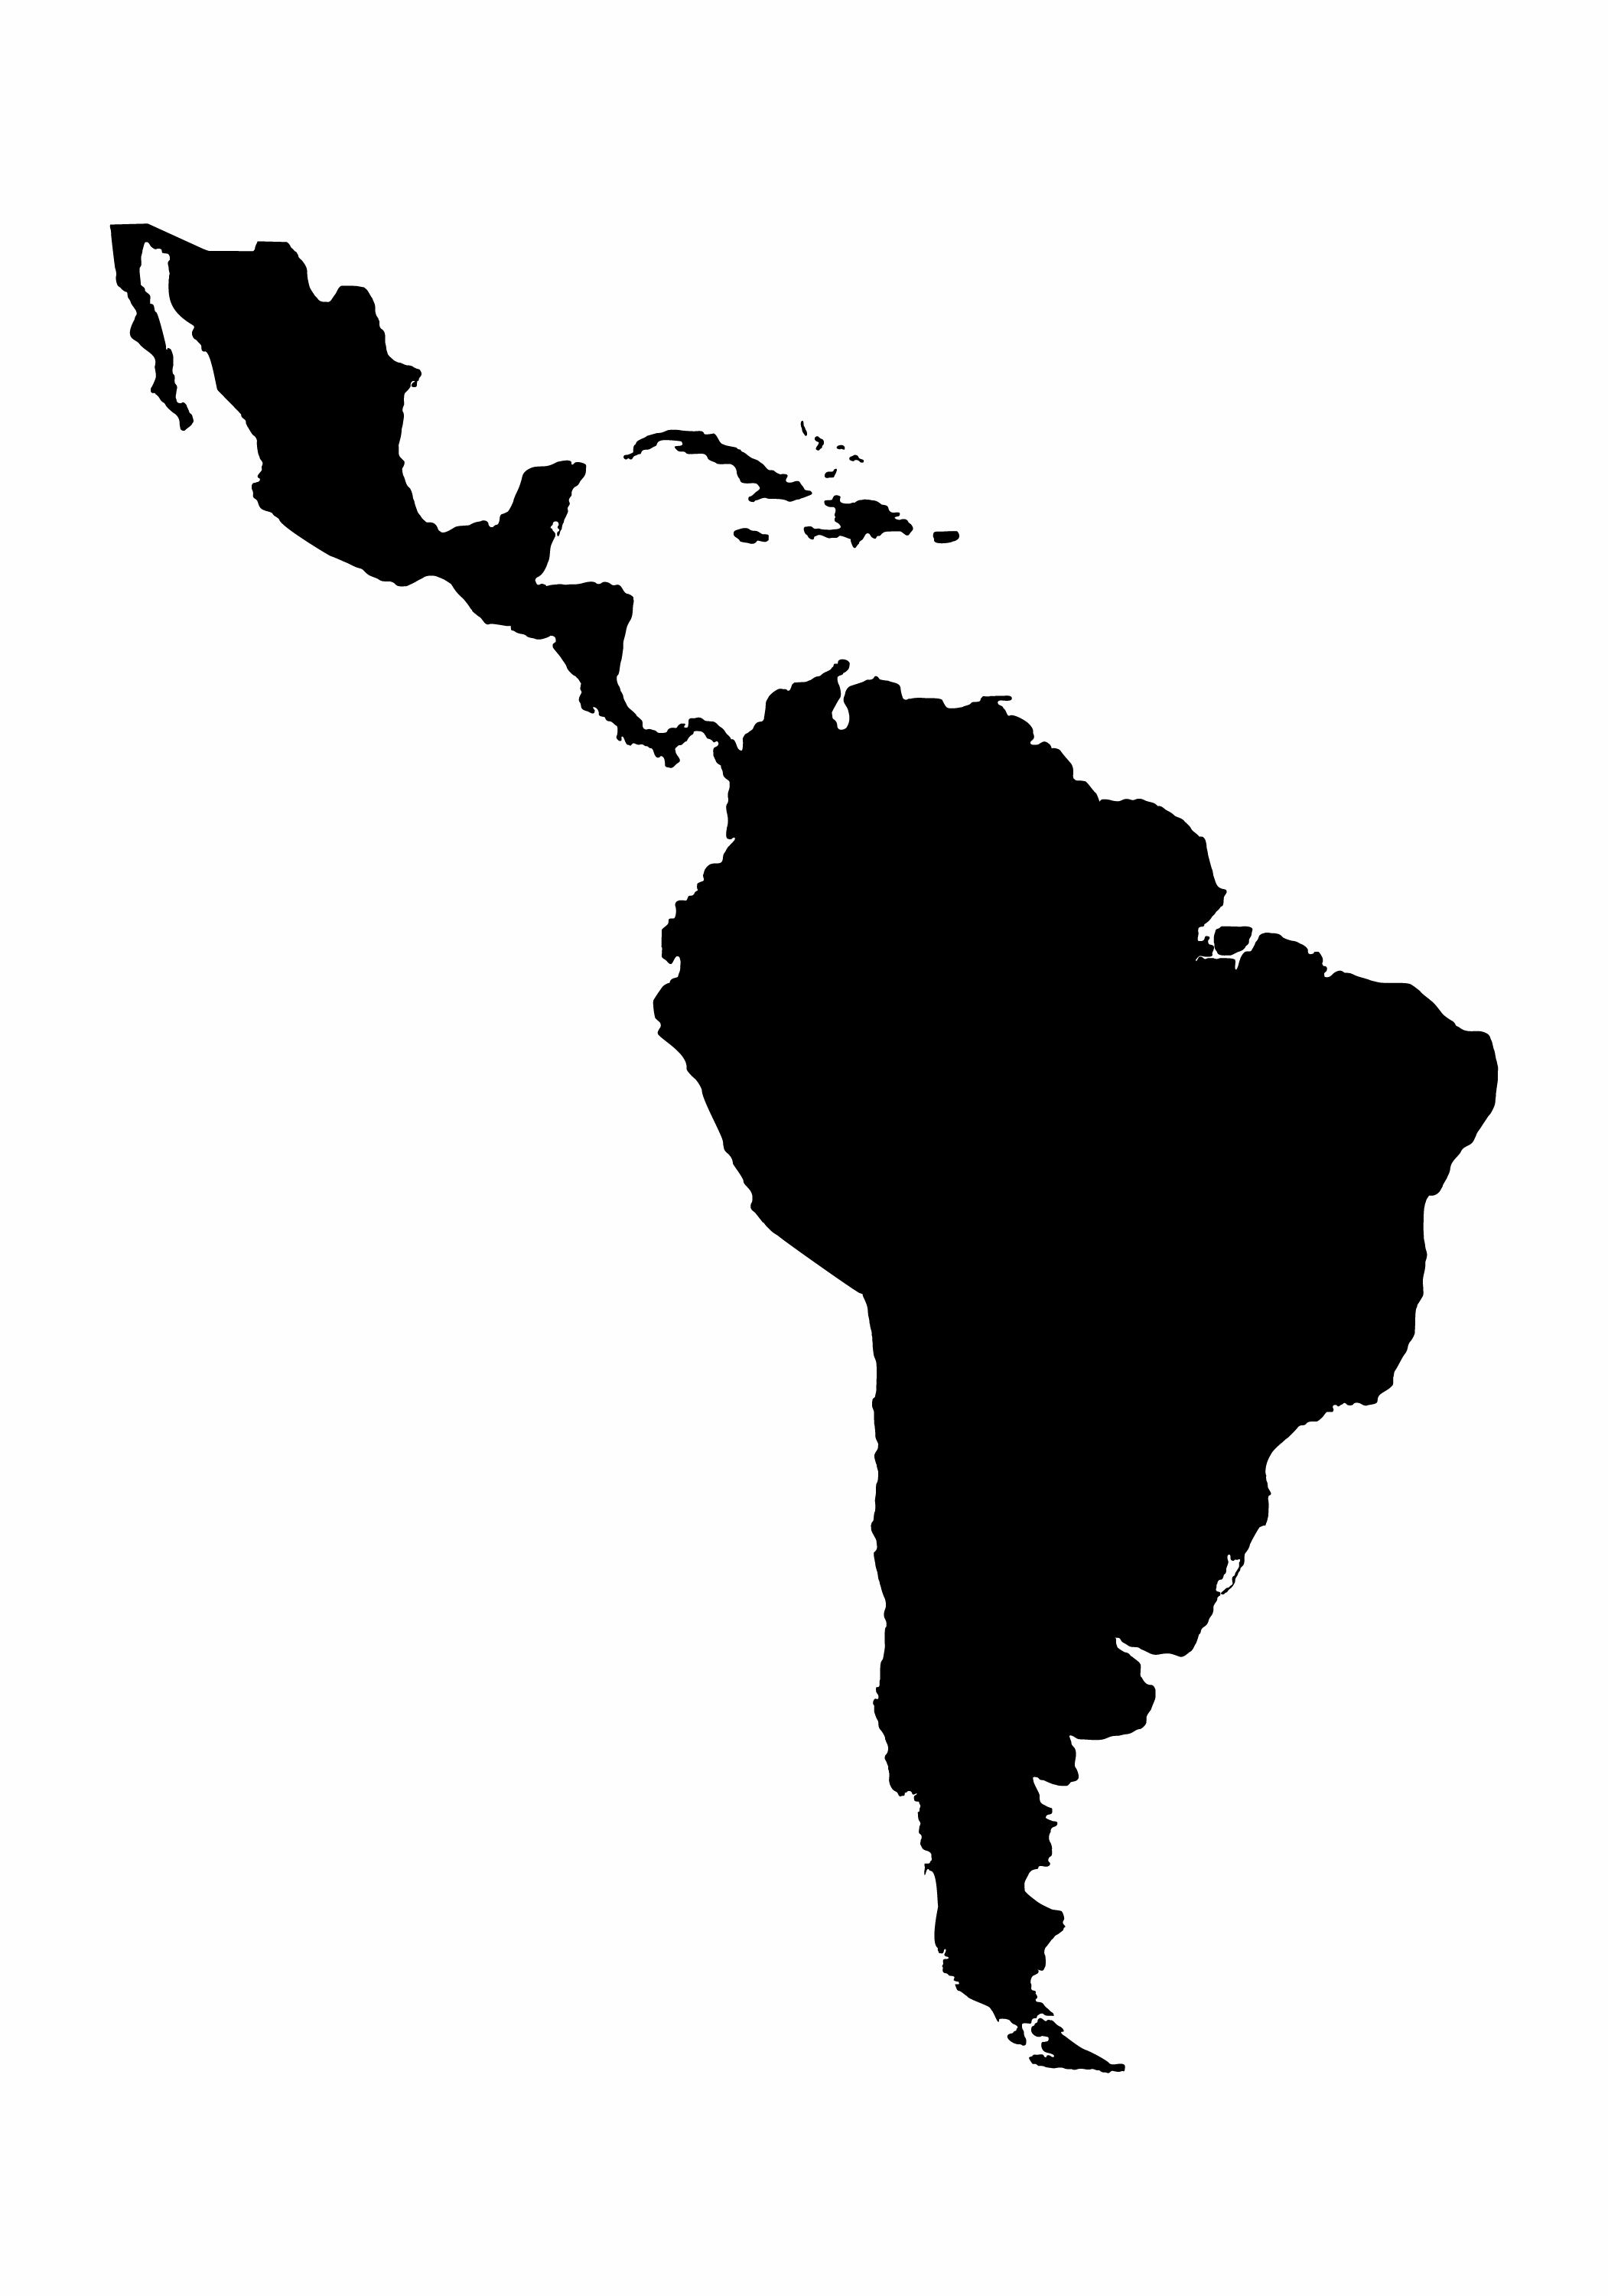 Watch this space -  a silhouette map of Latin and South America